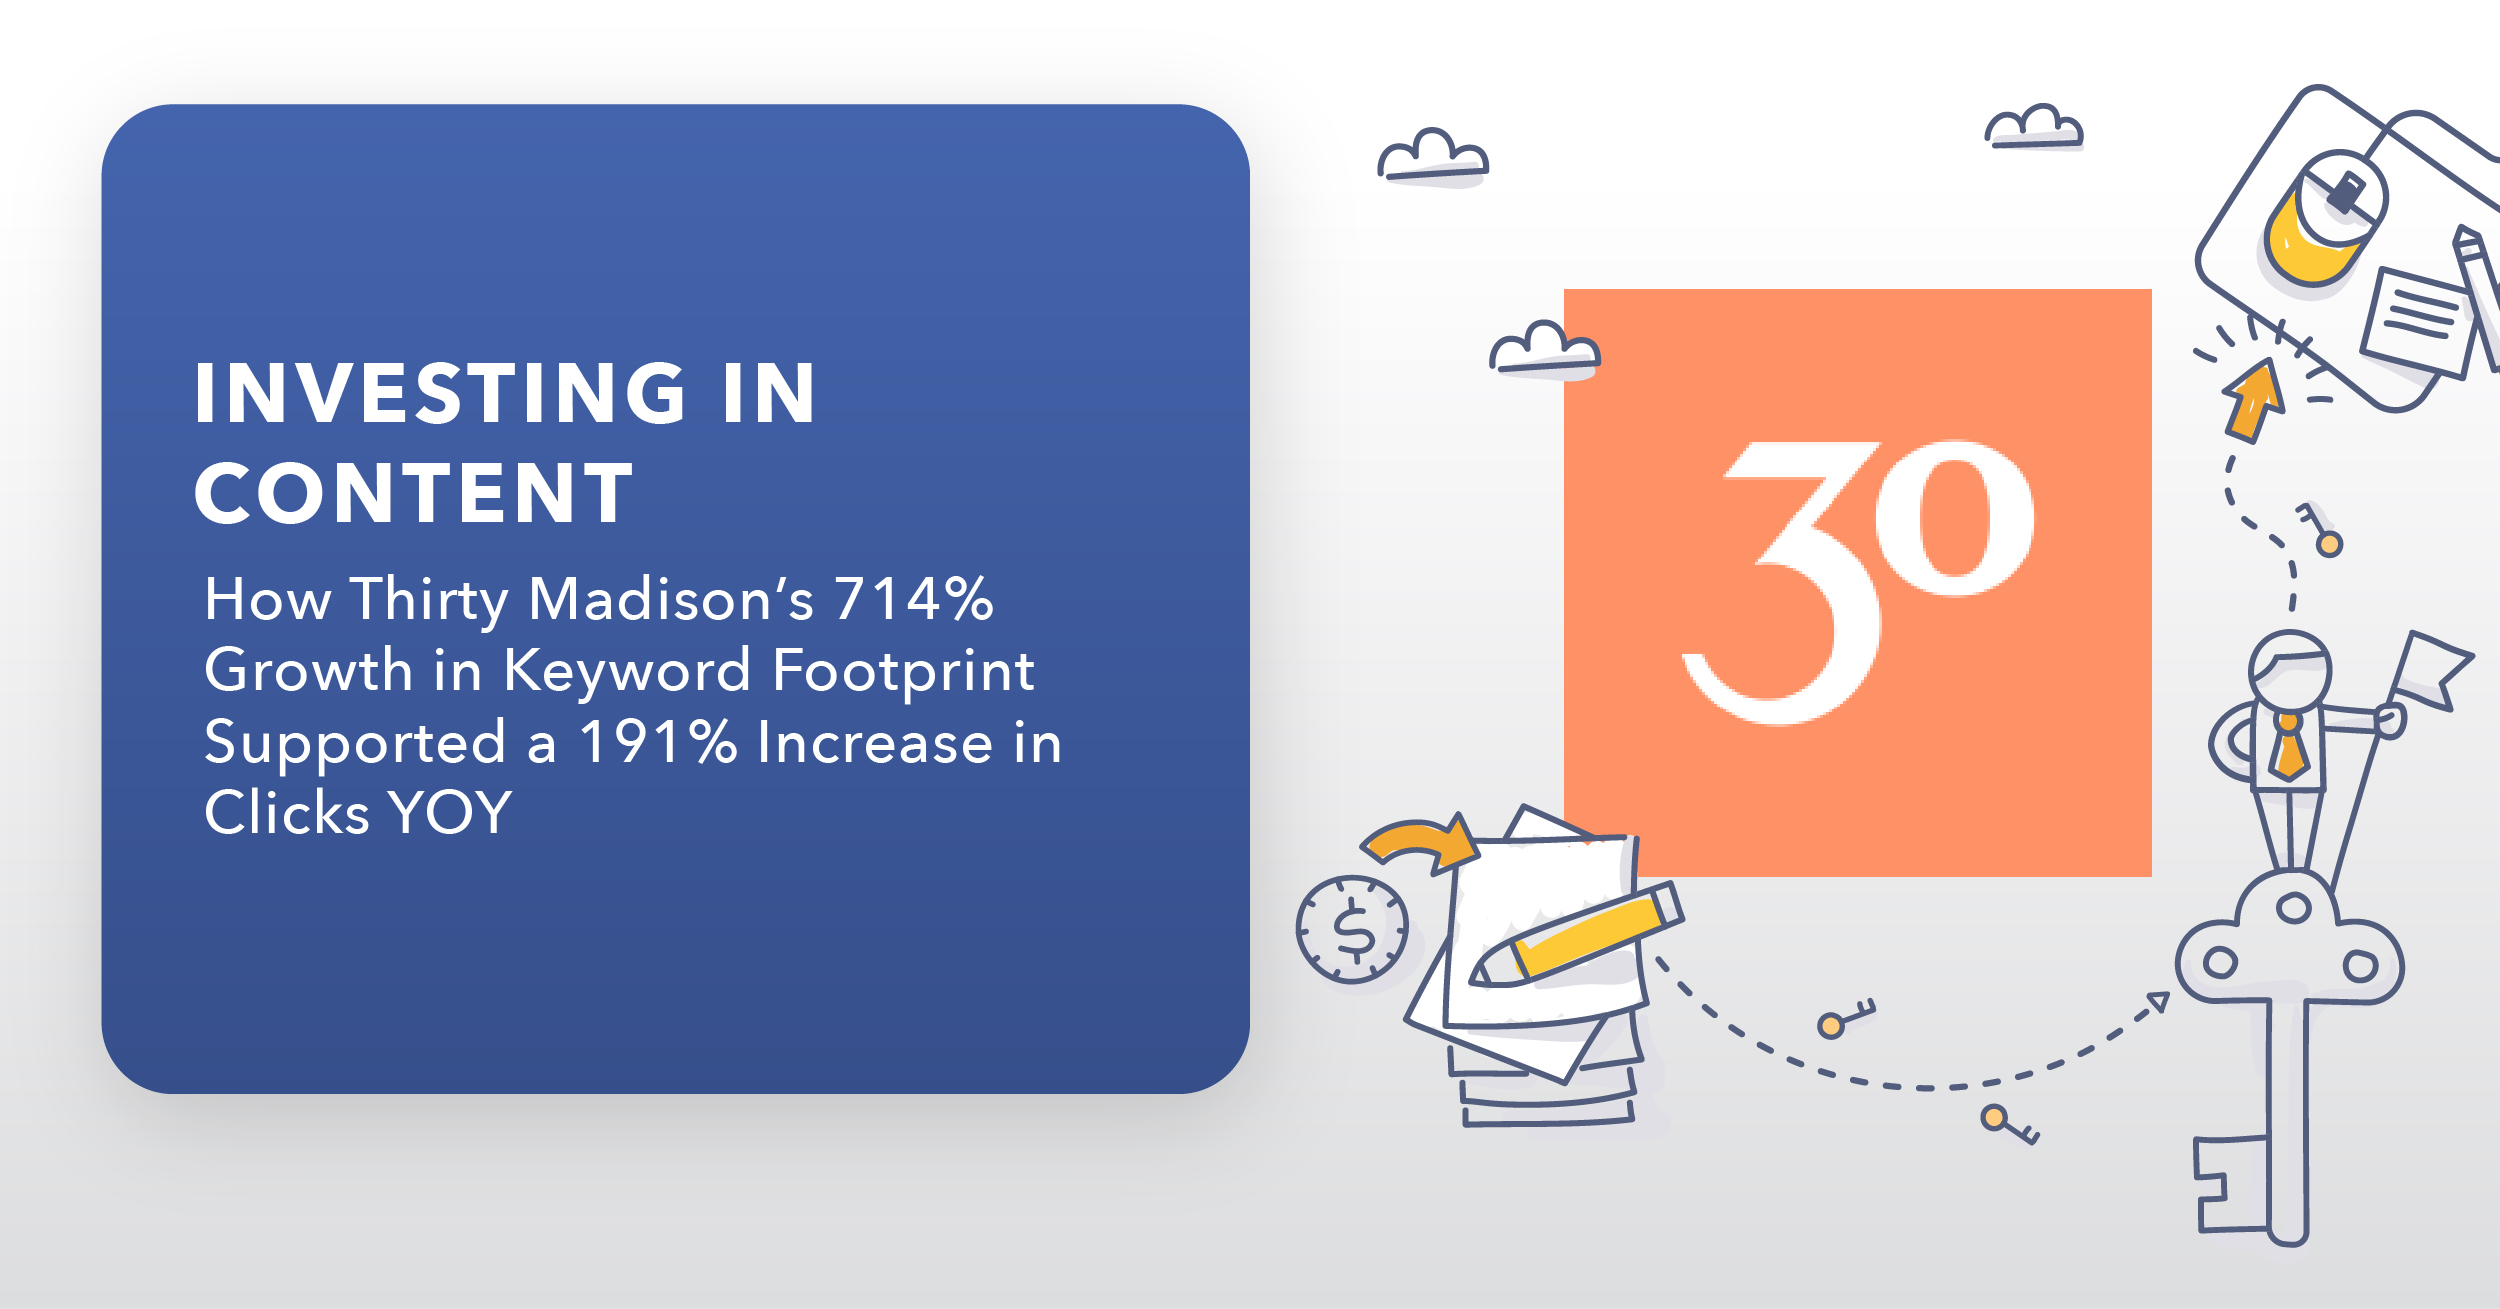 Investing in Content: How Thirty Madison’s 714% Growth in Keyword Footprint Supported a 191% Increase in Clicks YOY